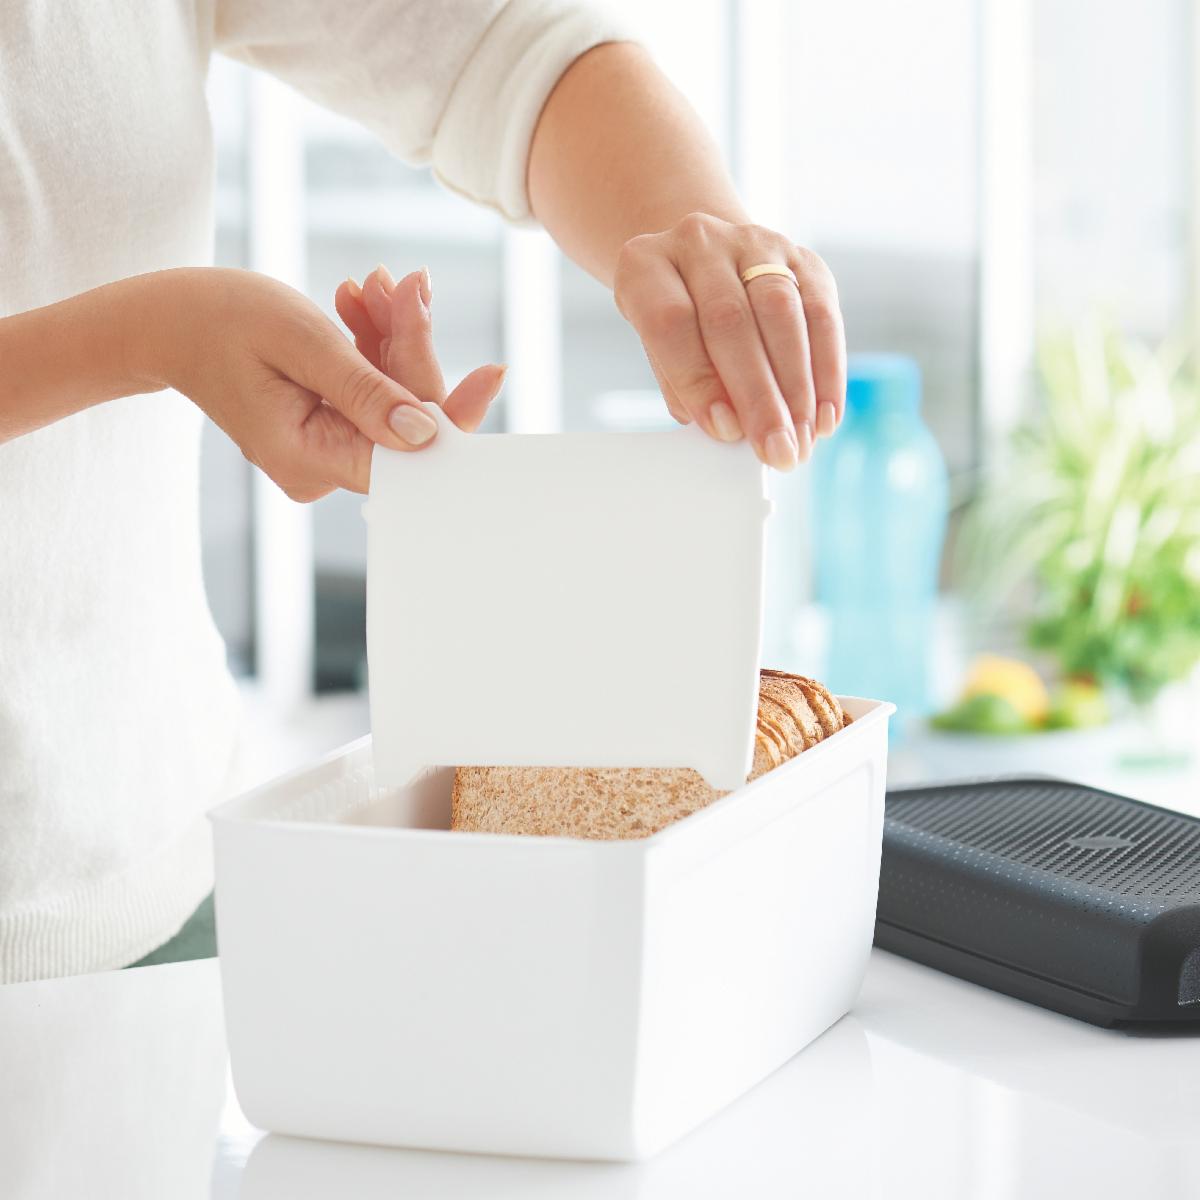 Tupperware Brands on Twitter: "Preserve your bread's freshness with our BreadSmart container whose divider makes picking out slices simple! # Tupperware https://t.co/Q3IczxqM6U" / Twitter